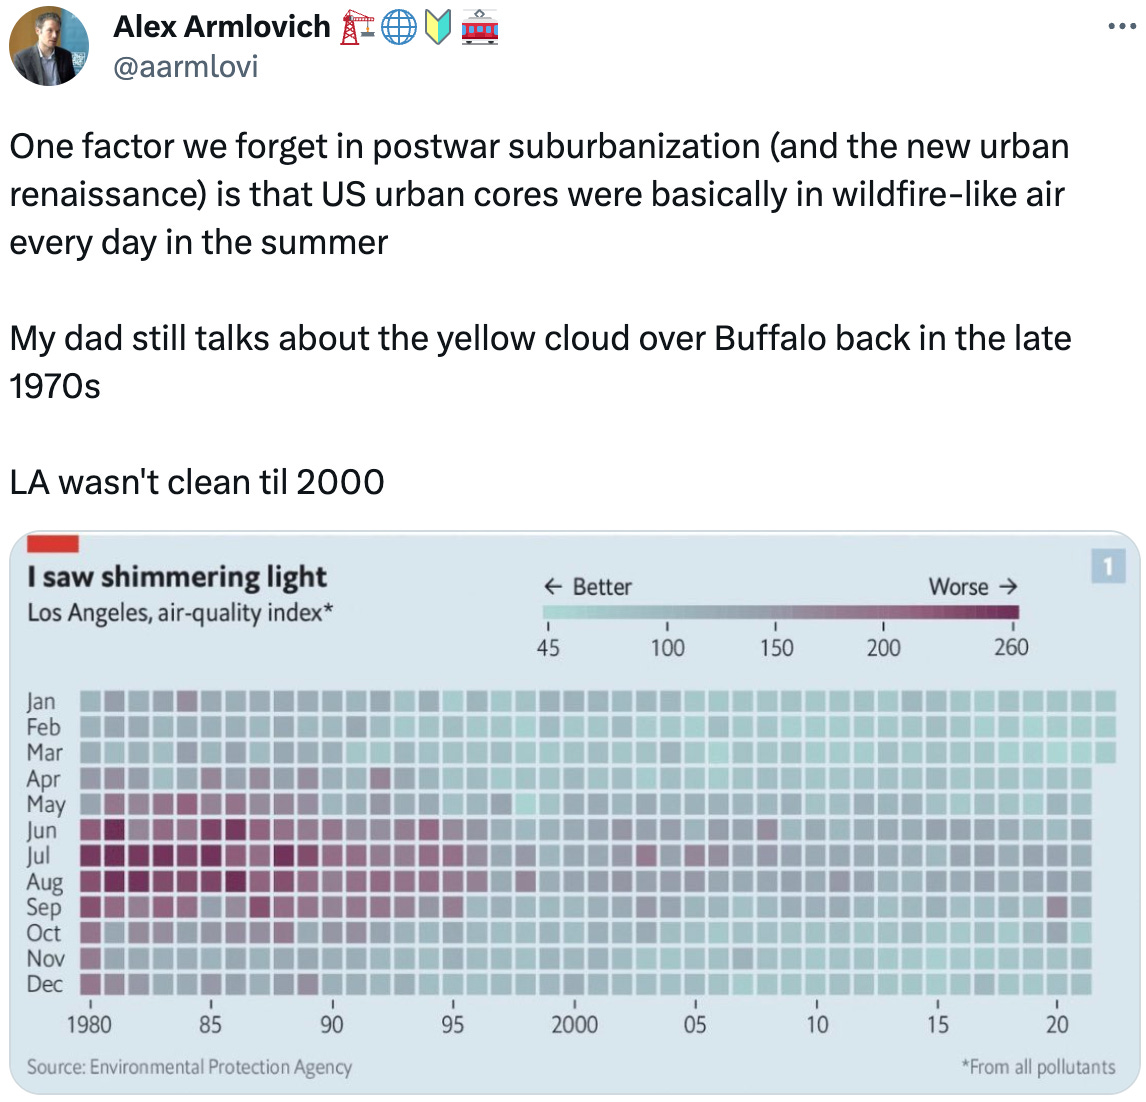  Alex Armlovich 🏗️🌐🔰🚋 @aarmlovi One factor we forget in postwar suburbanization (and the new urban renaissance) is that US urban cores were basically in wildfire-like air every day in the summer  My dad still talks about the yellow cloud over Buffalo back in the late 1970s  LA wasn't clean til 2000